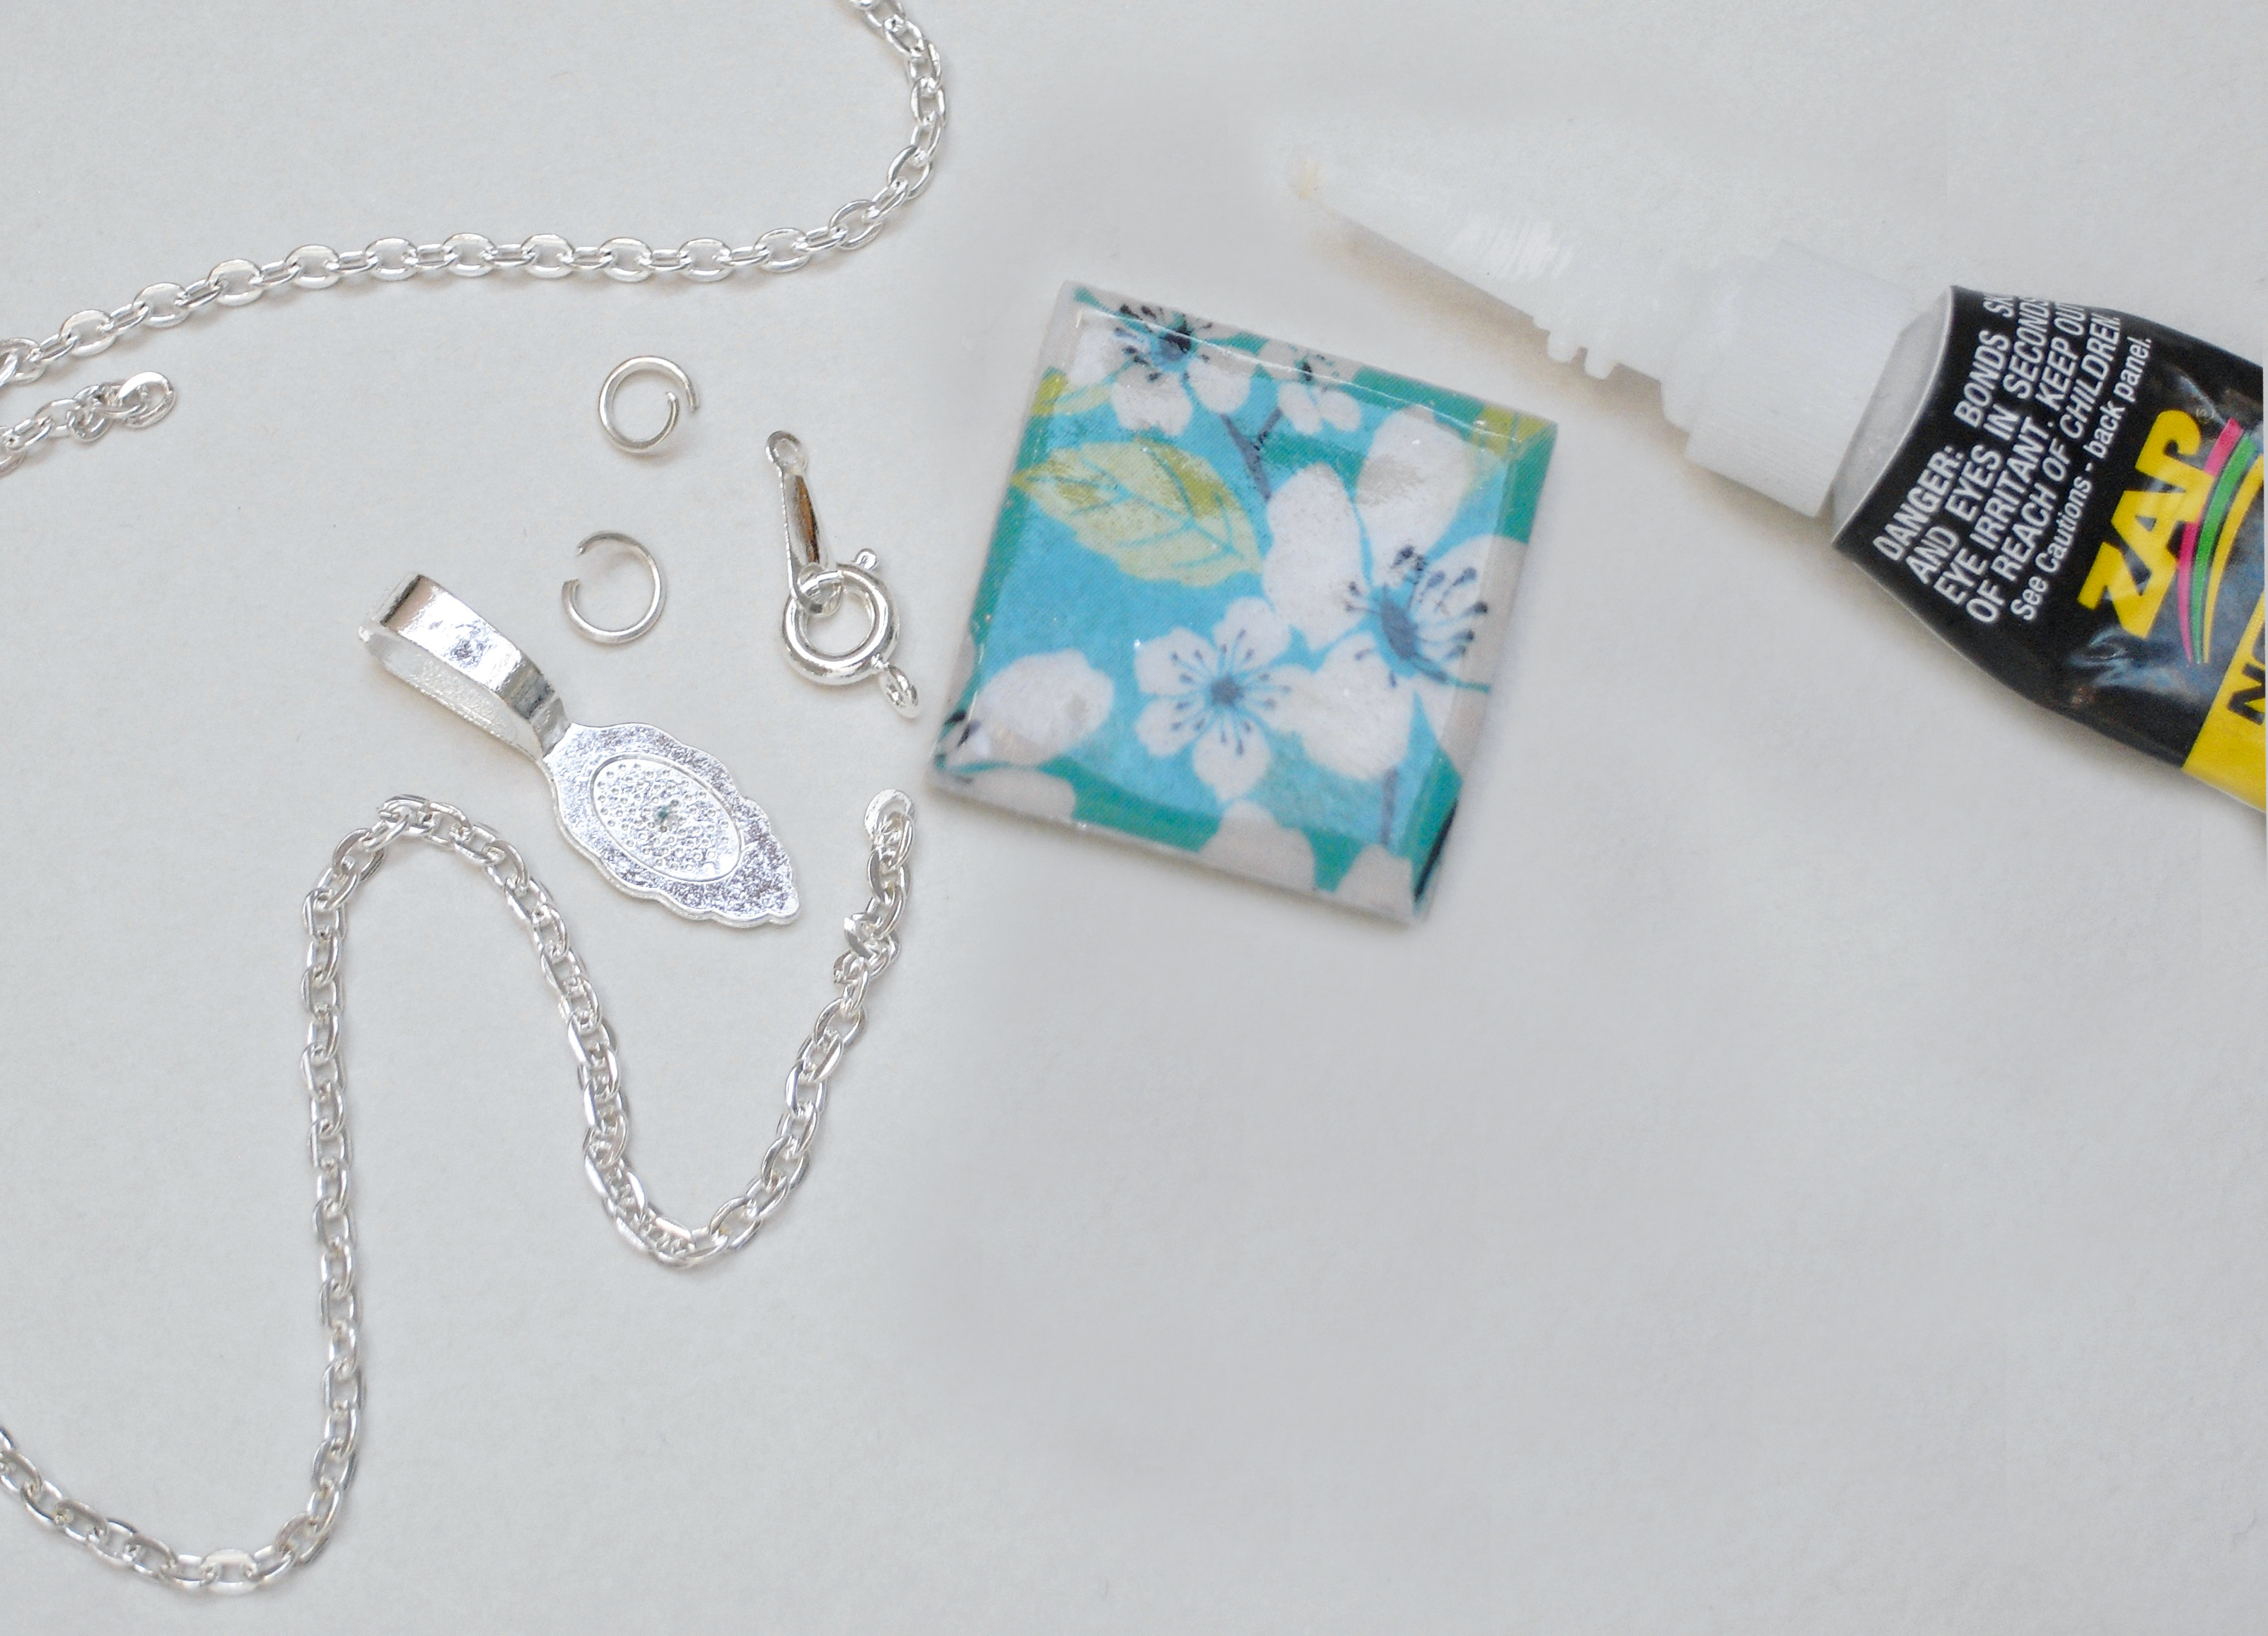 How to make a square pendant necklace